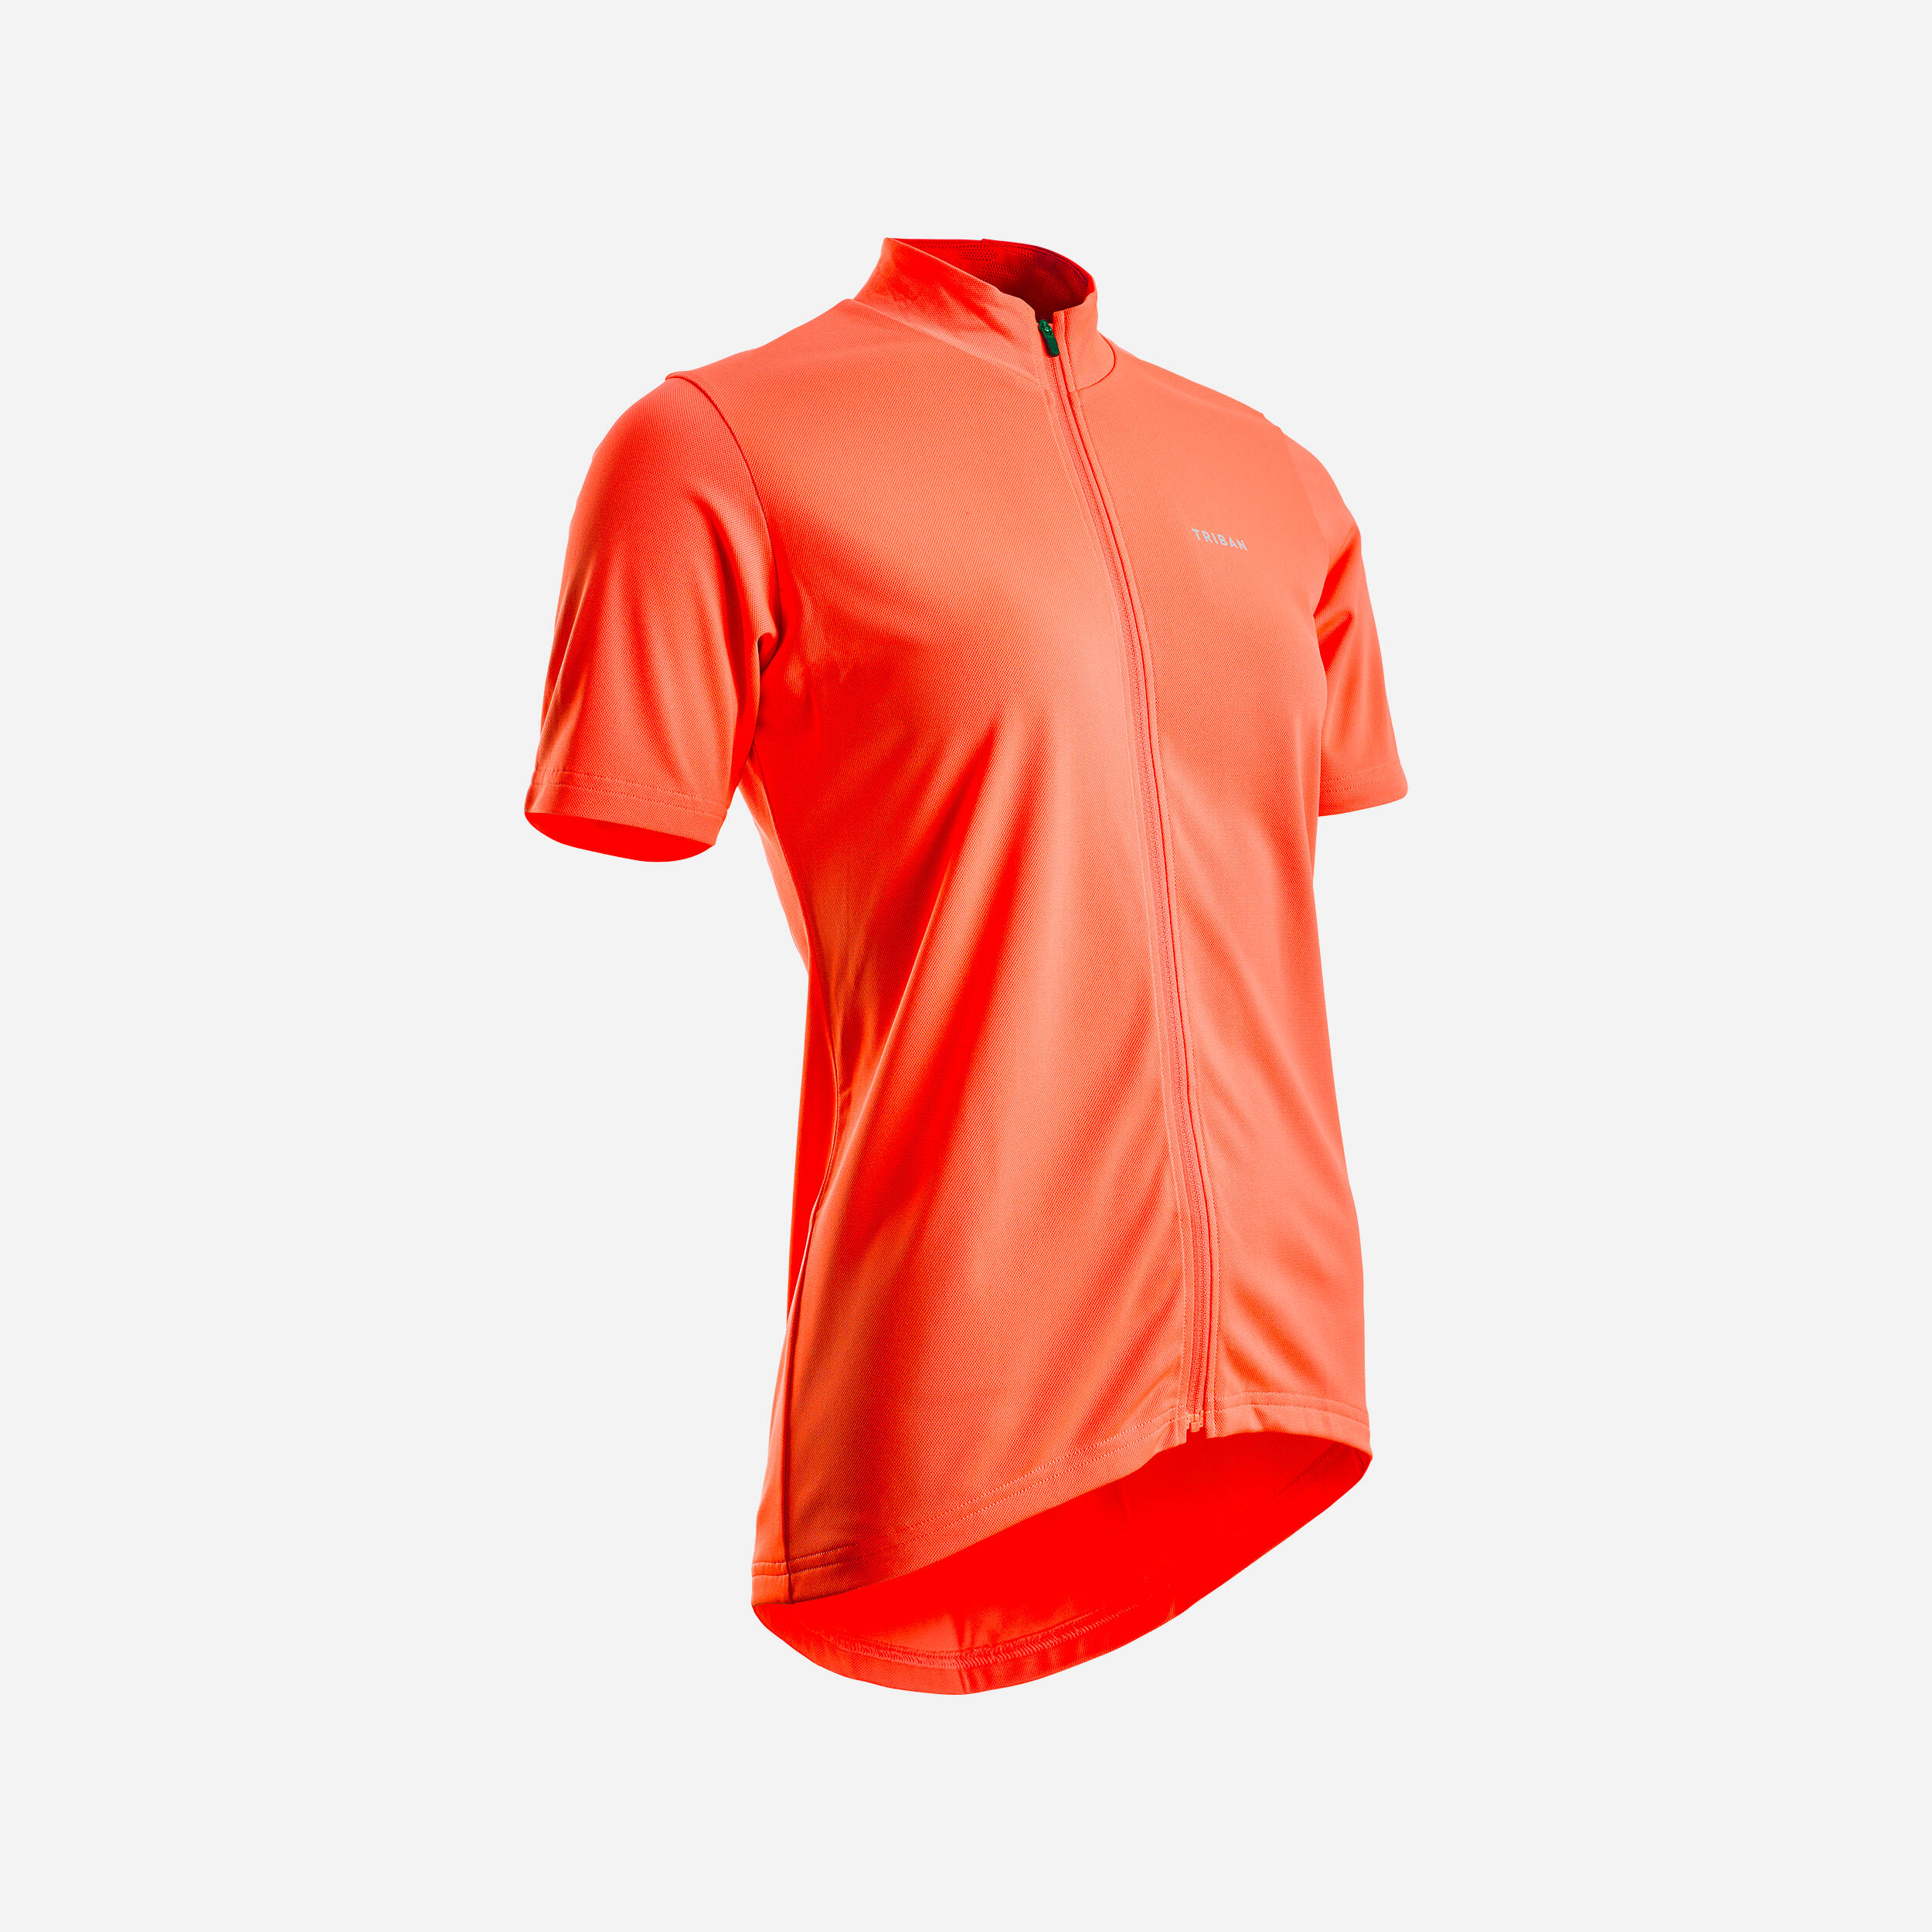 Image of Women’s Cycling Short-Sleeved Jersey - 100 Coral